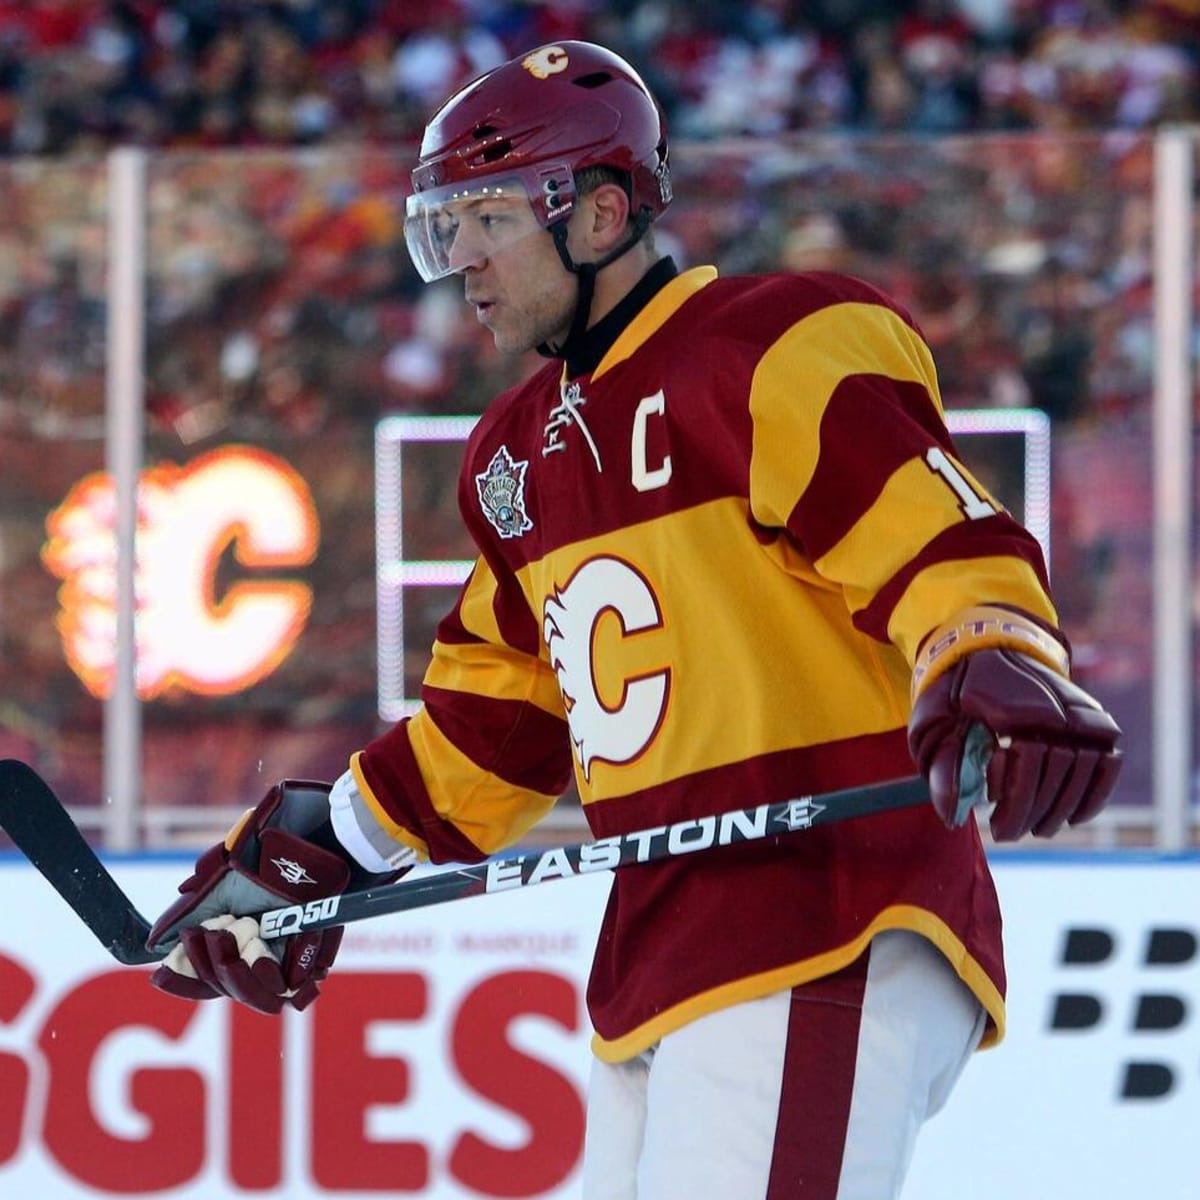 NHL announces 2011 Heritage Classic in Calgary; Flames uniforms